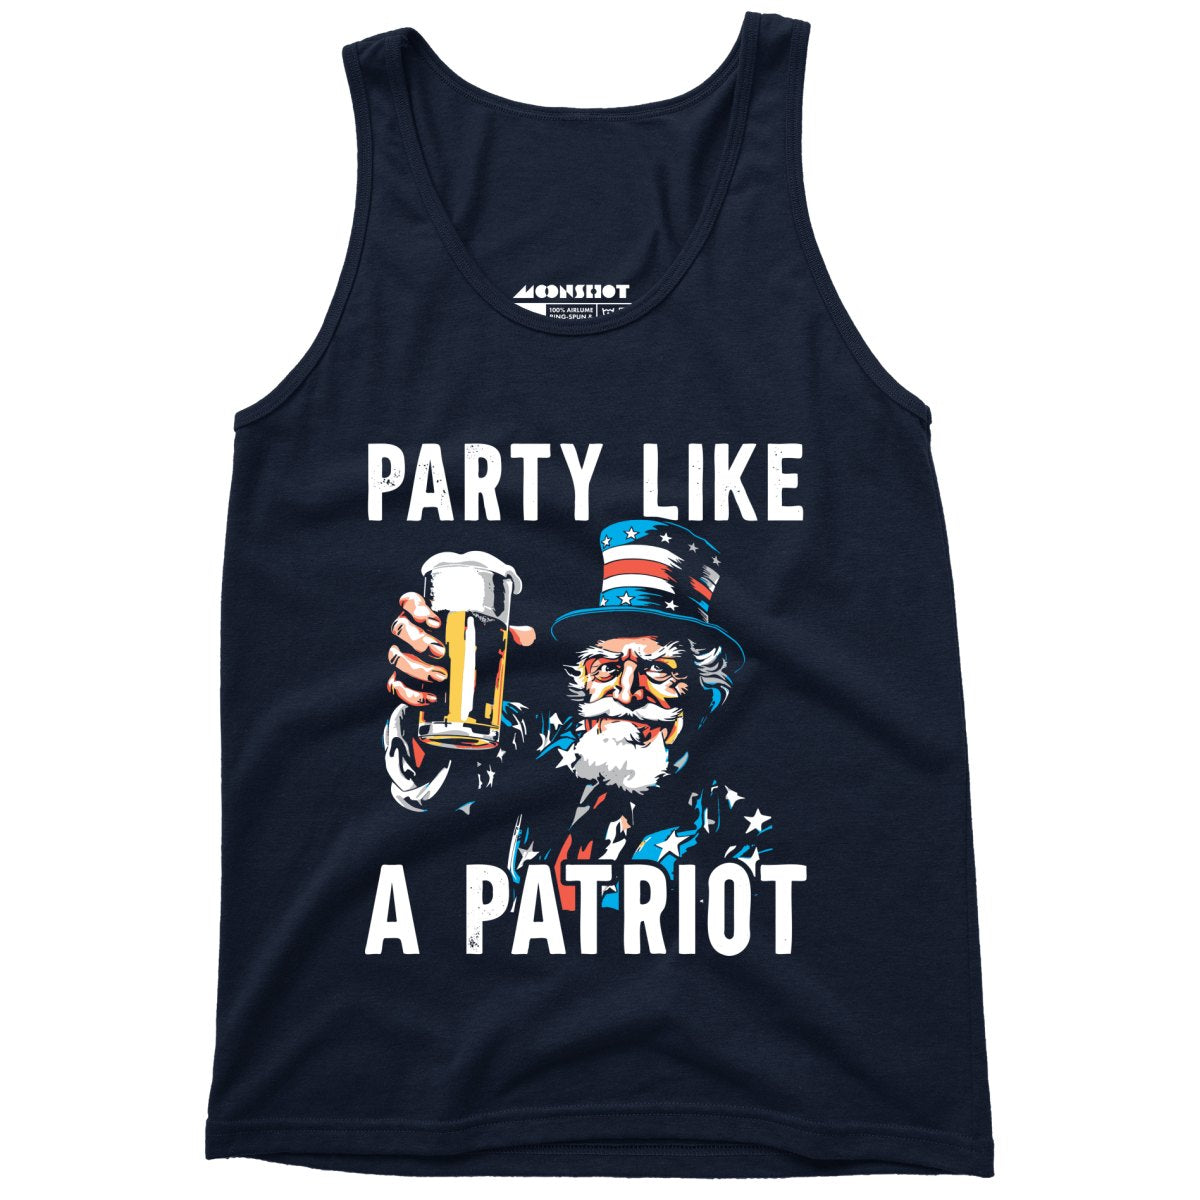 Party Like a Patriot - Unisex Tank Top